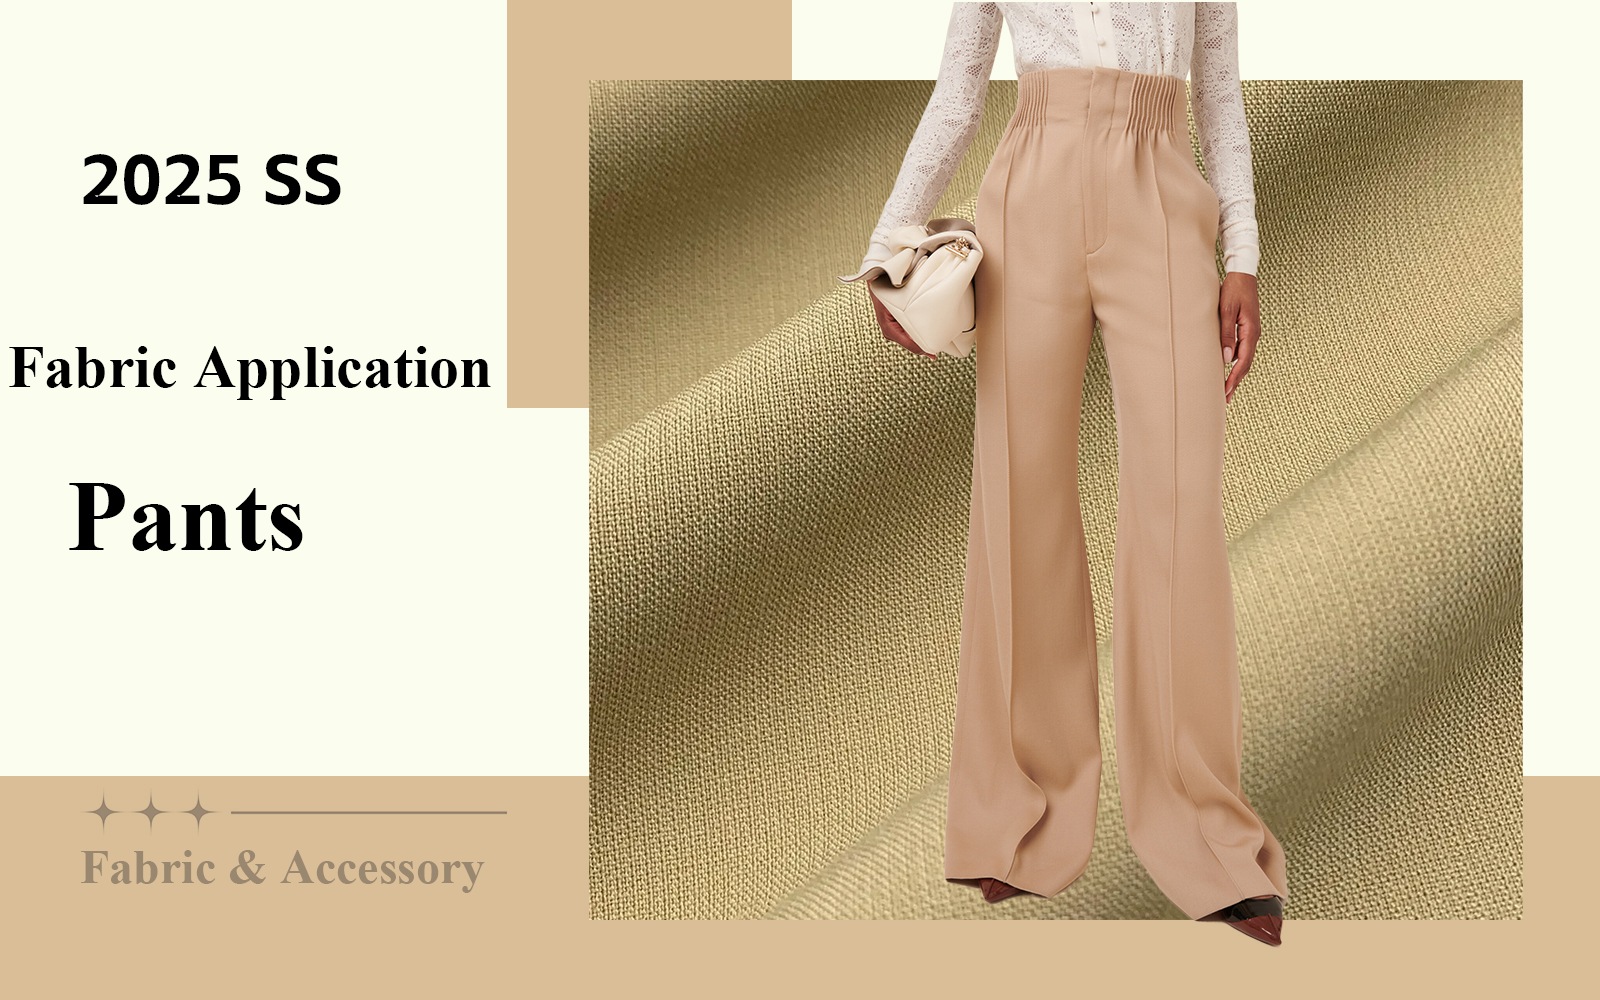 The Fabric Trend for Women's Pants